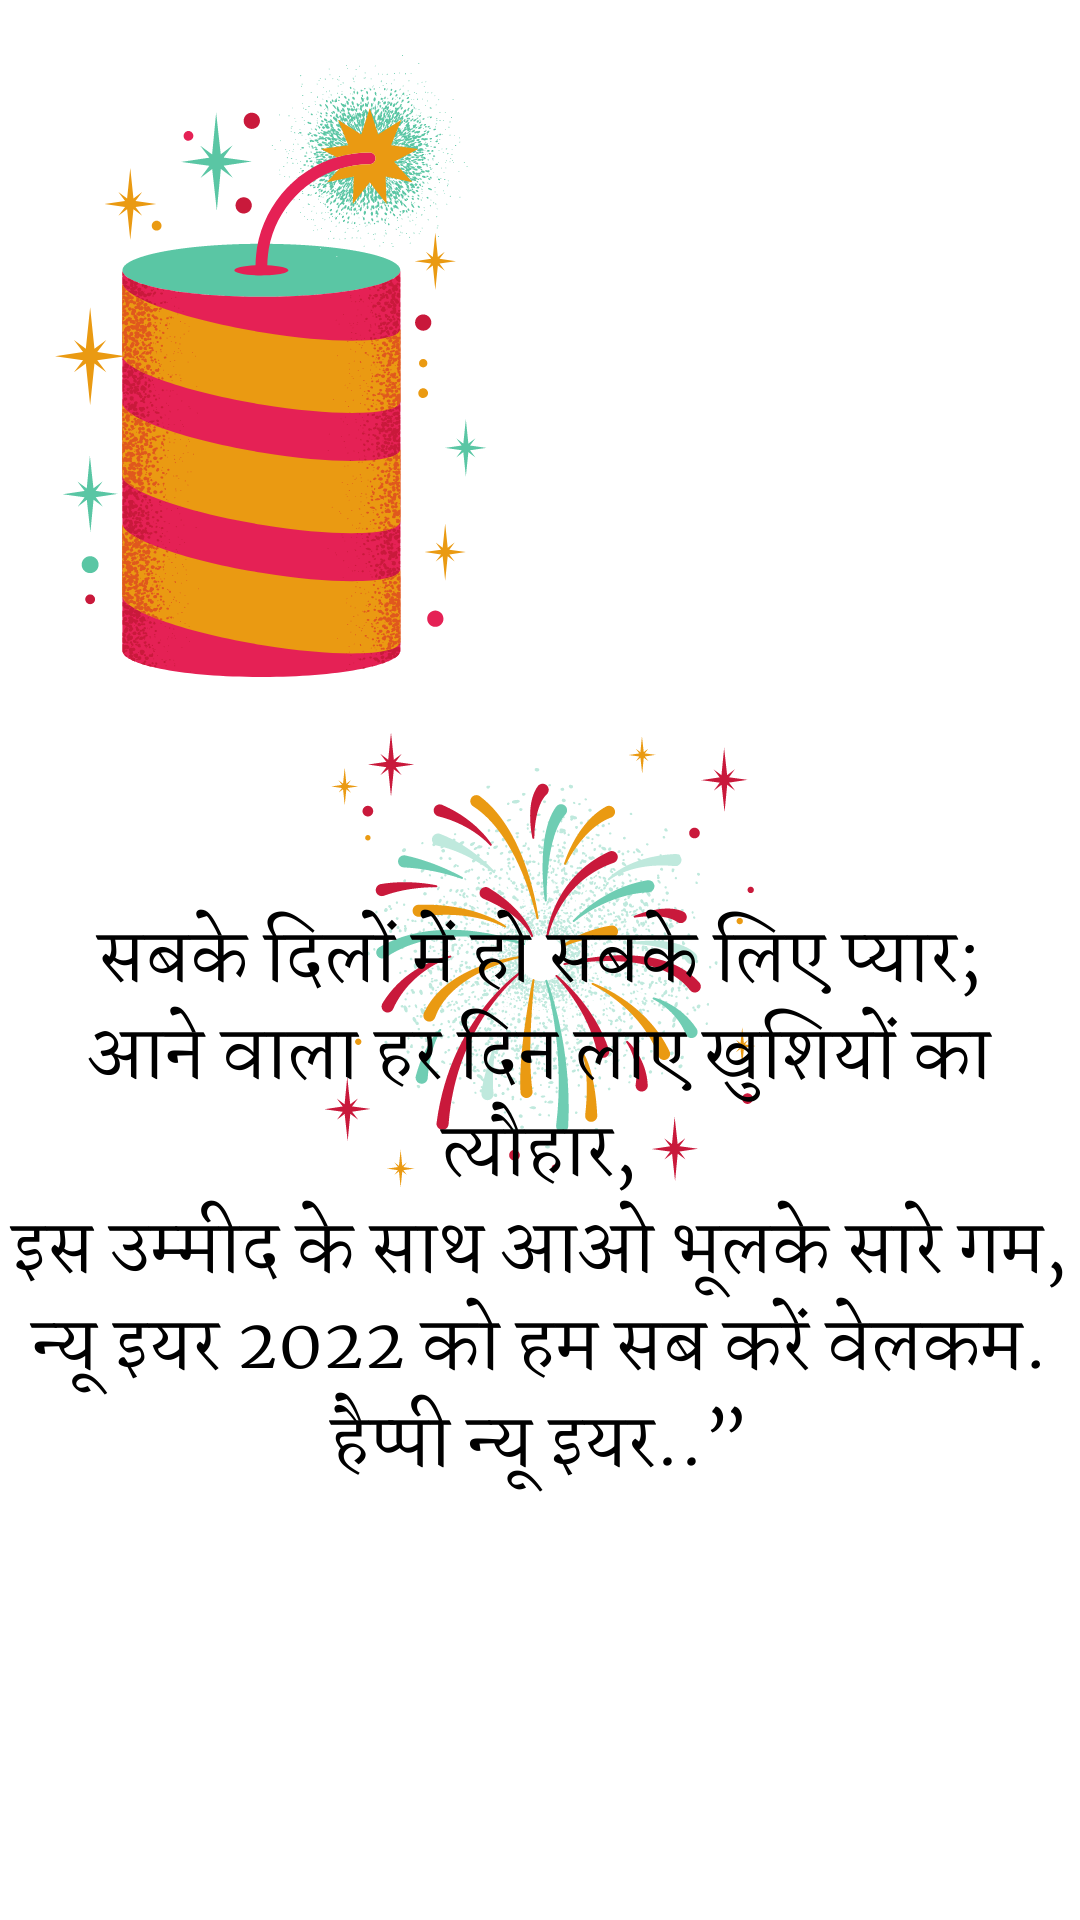 Happy New year 2022 wishes,  quotes, slogan, SMS shayari, Status, Facebook Whatsapp Instagram for mother, father, brother, girlfriend, sister, family, everyone, in hindi photos & images